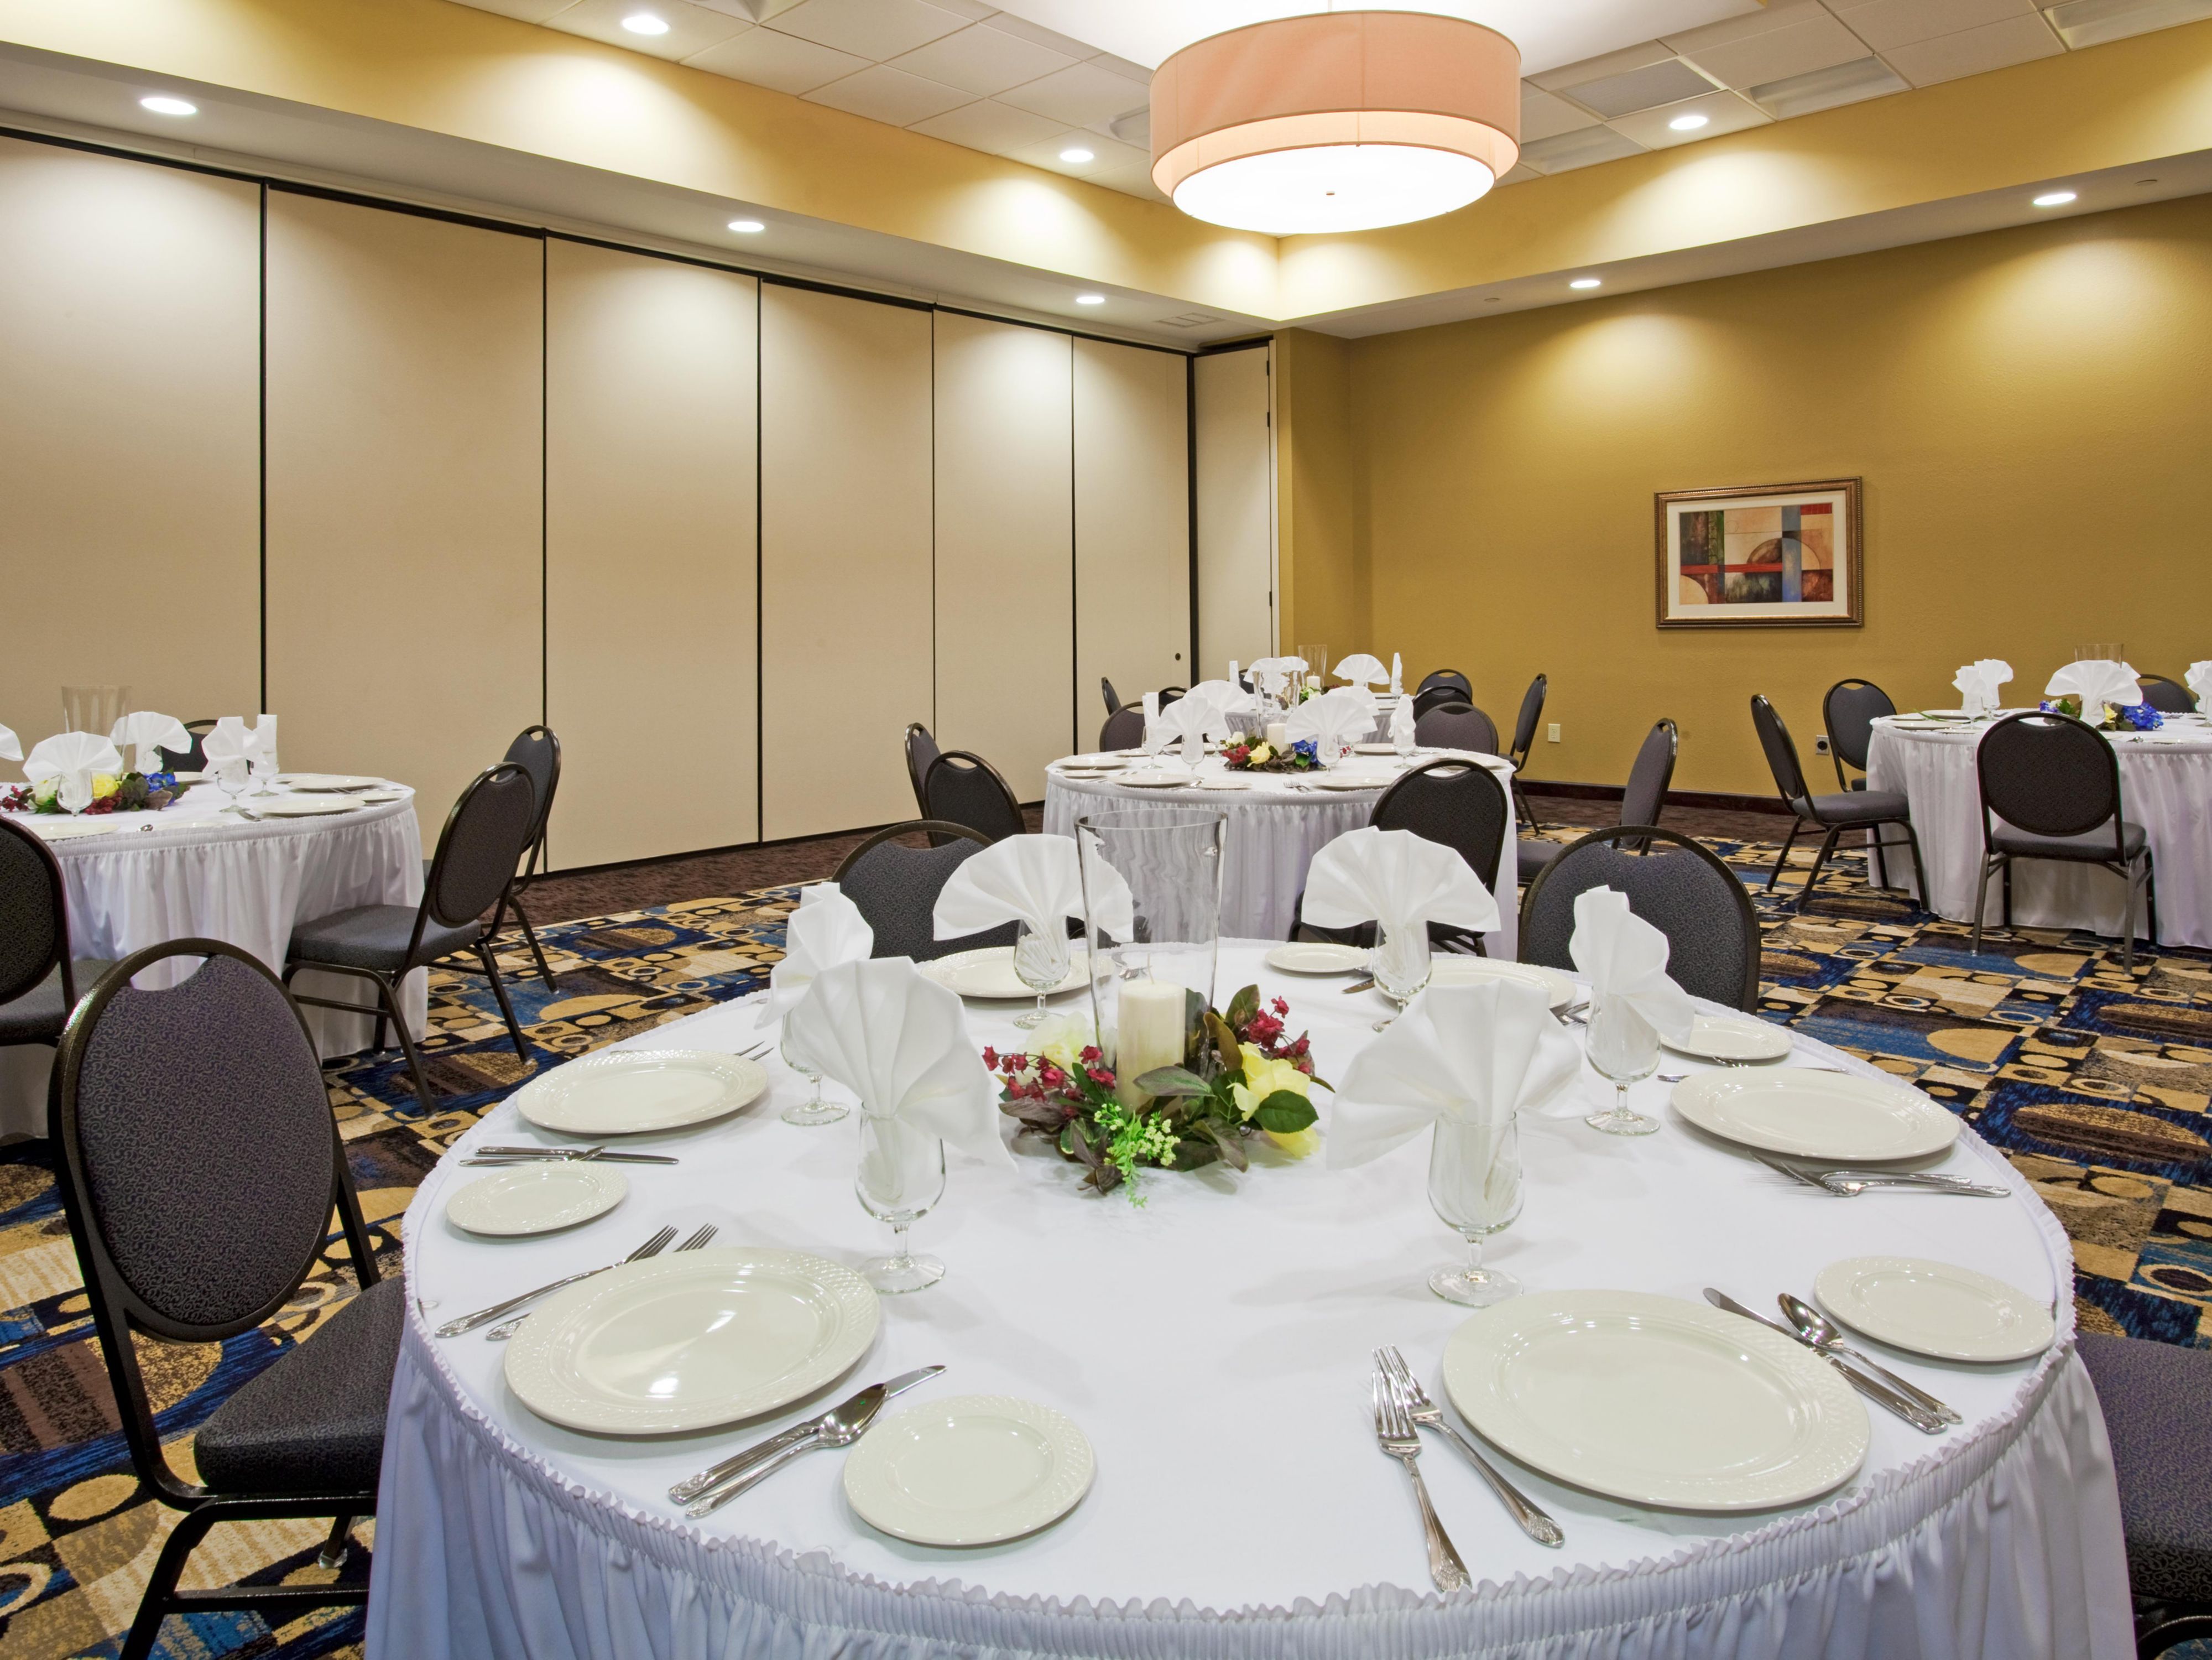 Our two meeting rooms have more than 1,500 square feet of space and can accommodate up to 100 people in multiple configurations. Free high-speed, wired and wireless internet access is available, as well as A/V equipment and catering. Feel free to call and speak with a sales associate for availability and pricing. 